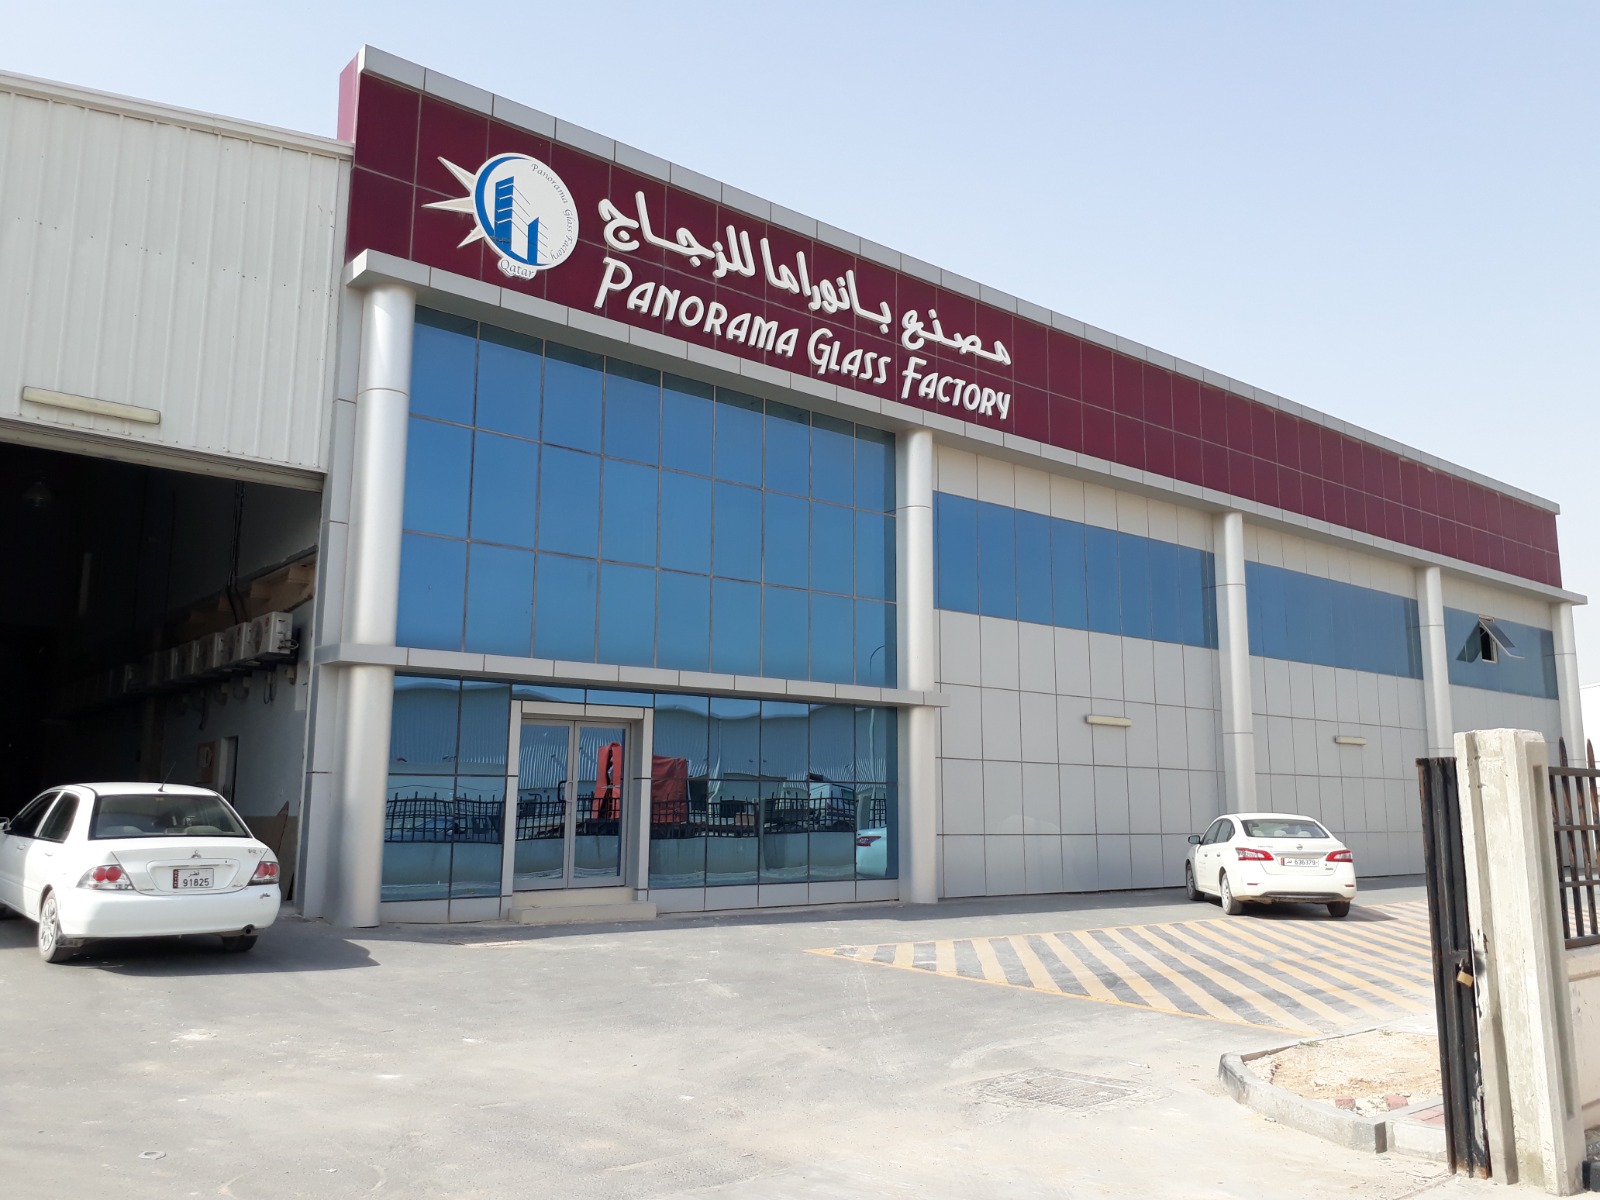 Safeera Trading and Contracting<br> <span class="location"><span class="cl">Location: </span>: Qatar Industrial Area  </span>  <br> <span class="cl">Client: </span>Panorama Glass Factory </span>